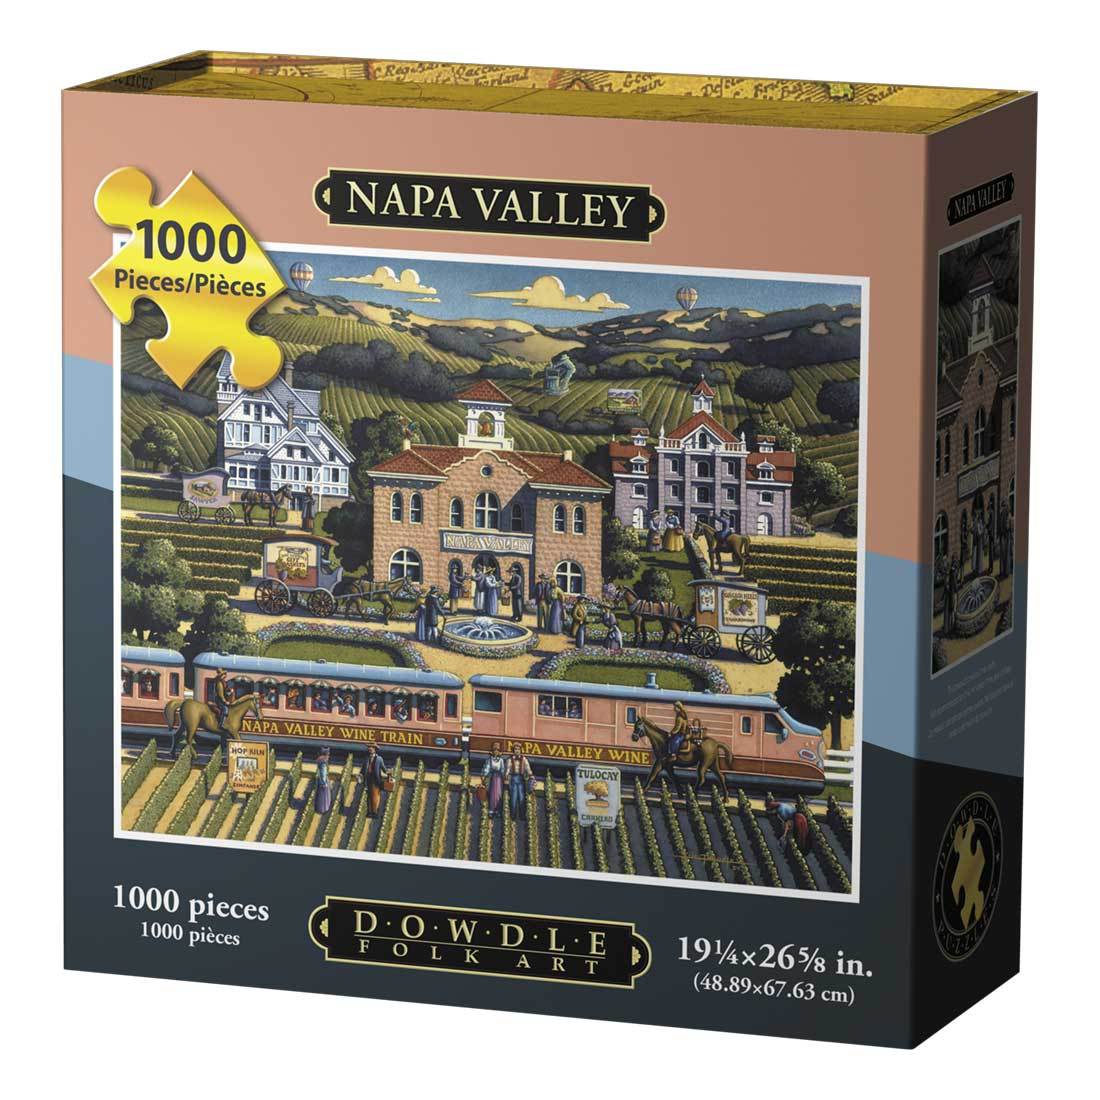 10092 19.25 X 26.6 In. Napa Valley Jigsaw Puzzle - 1000 Piece